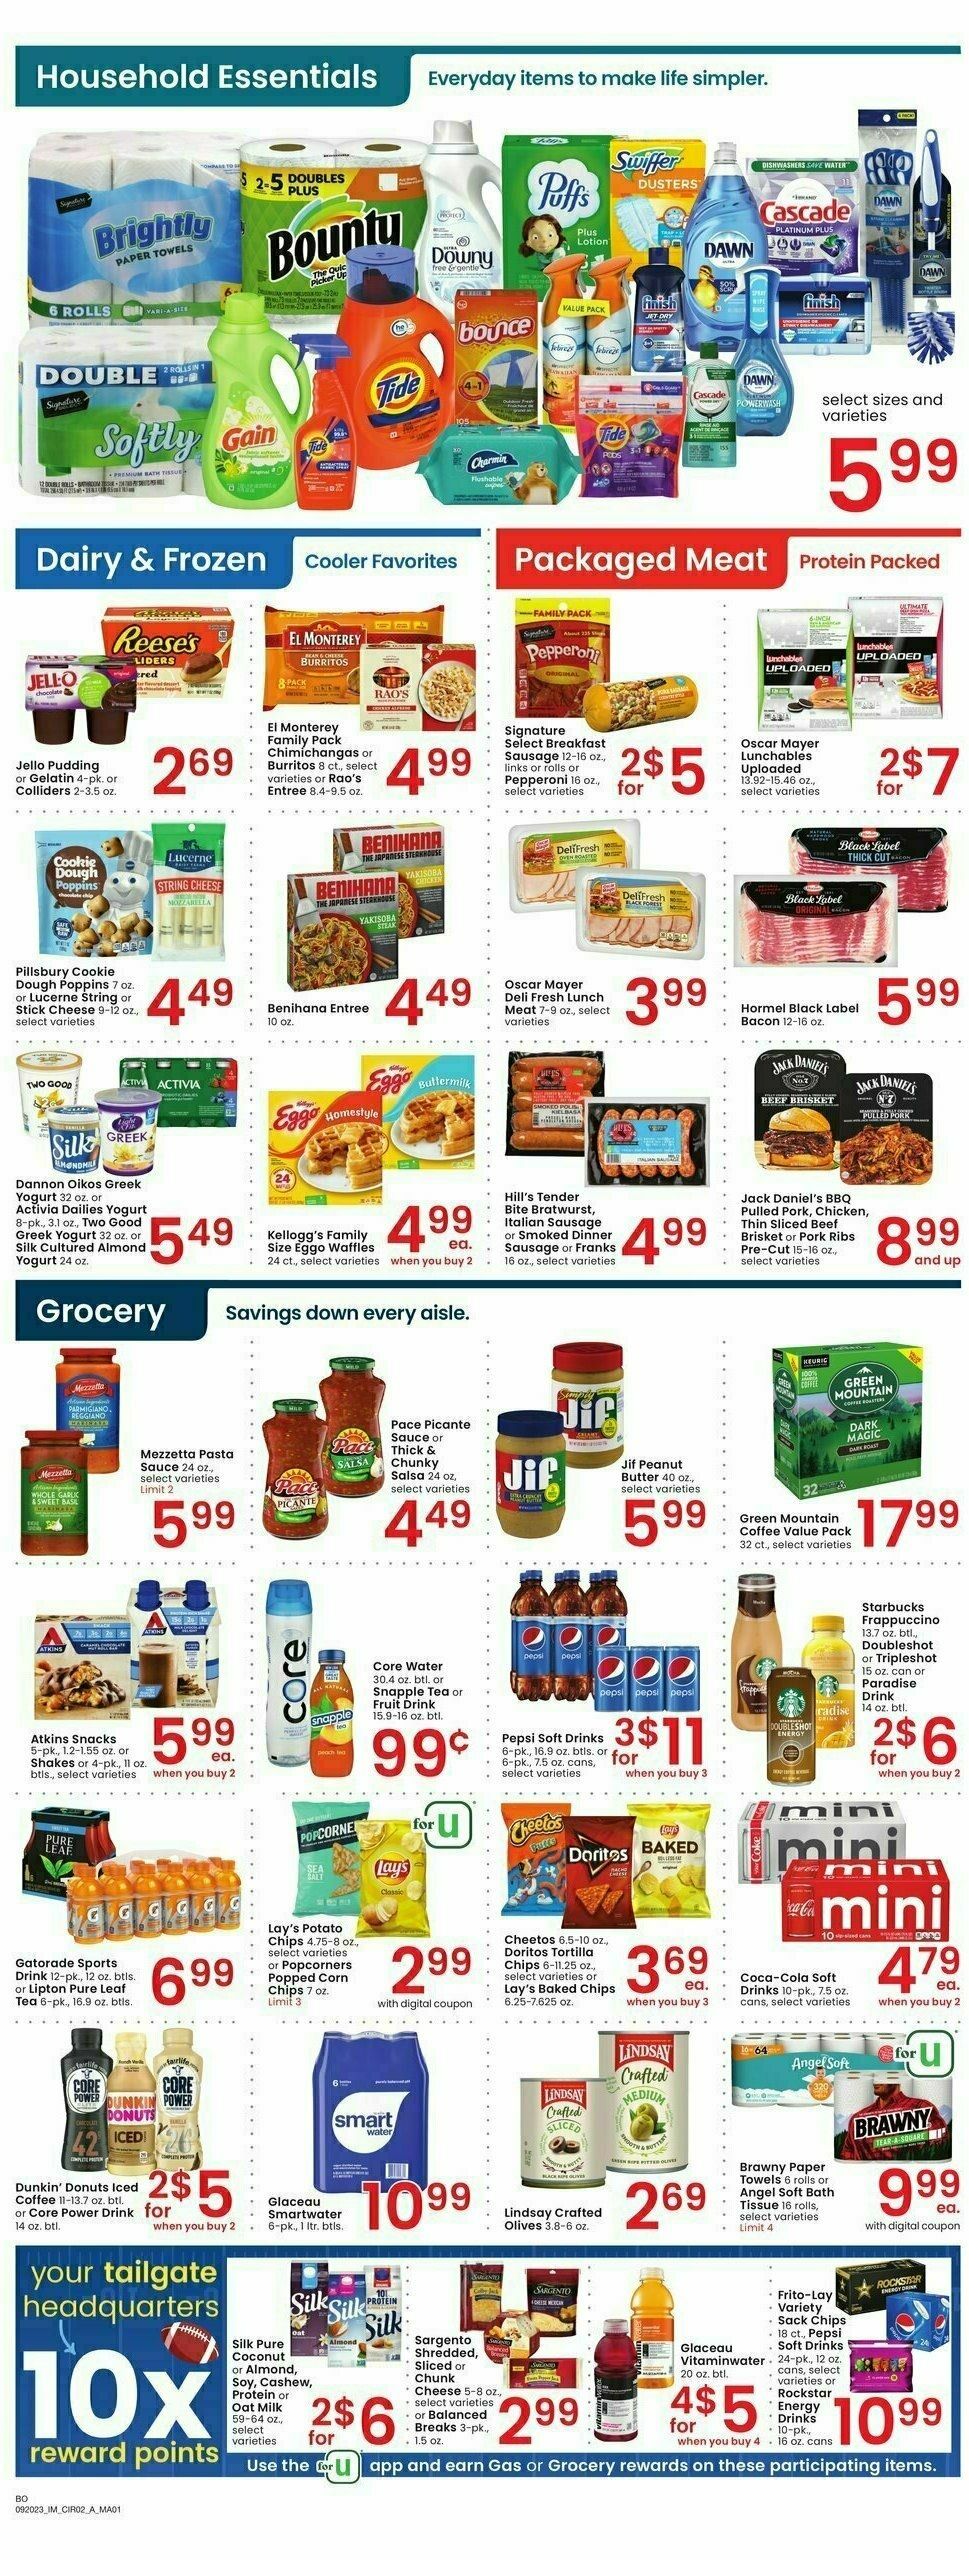 Albertsons Weekly Ad from September 20